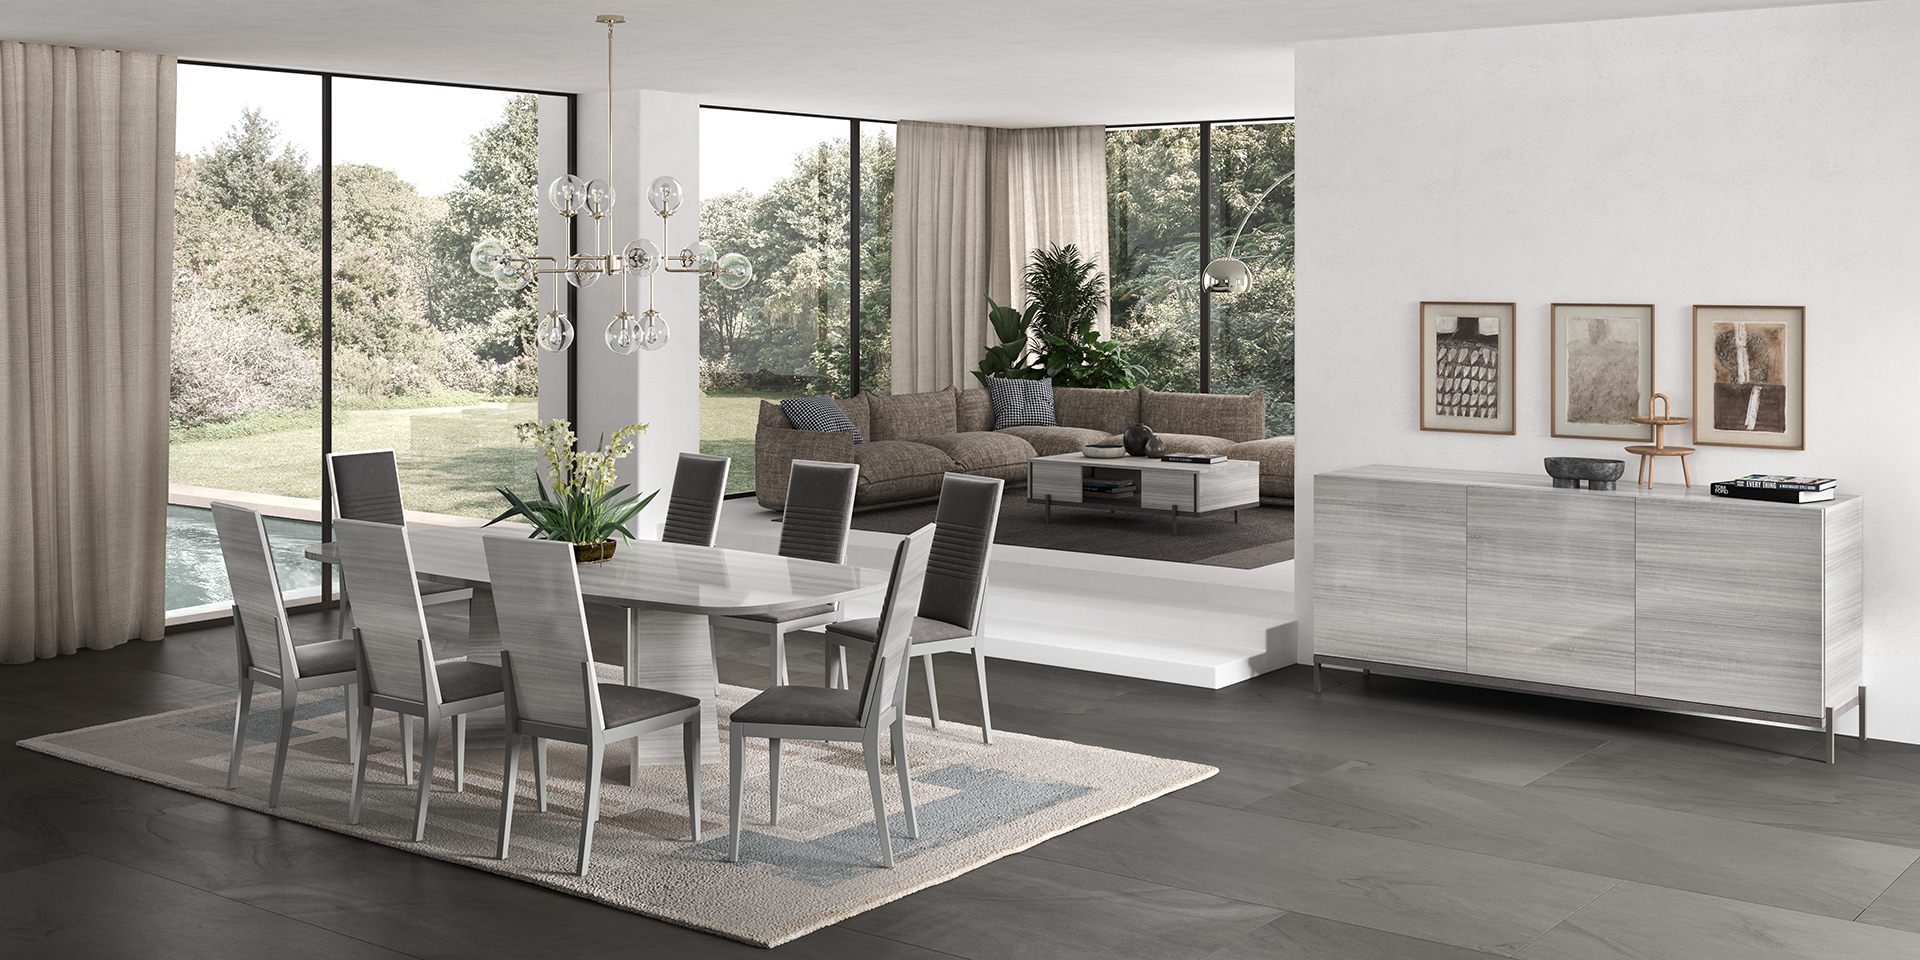 Brands Dupen Dining Rooms, Spain Mia Dining room Additional items